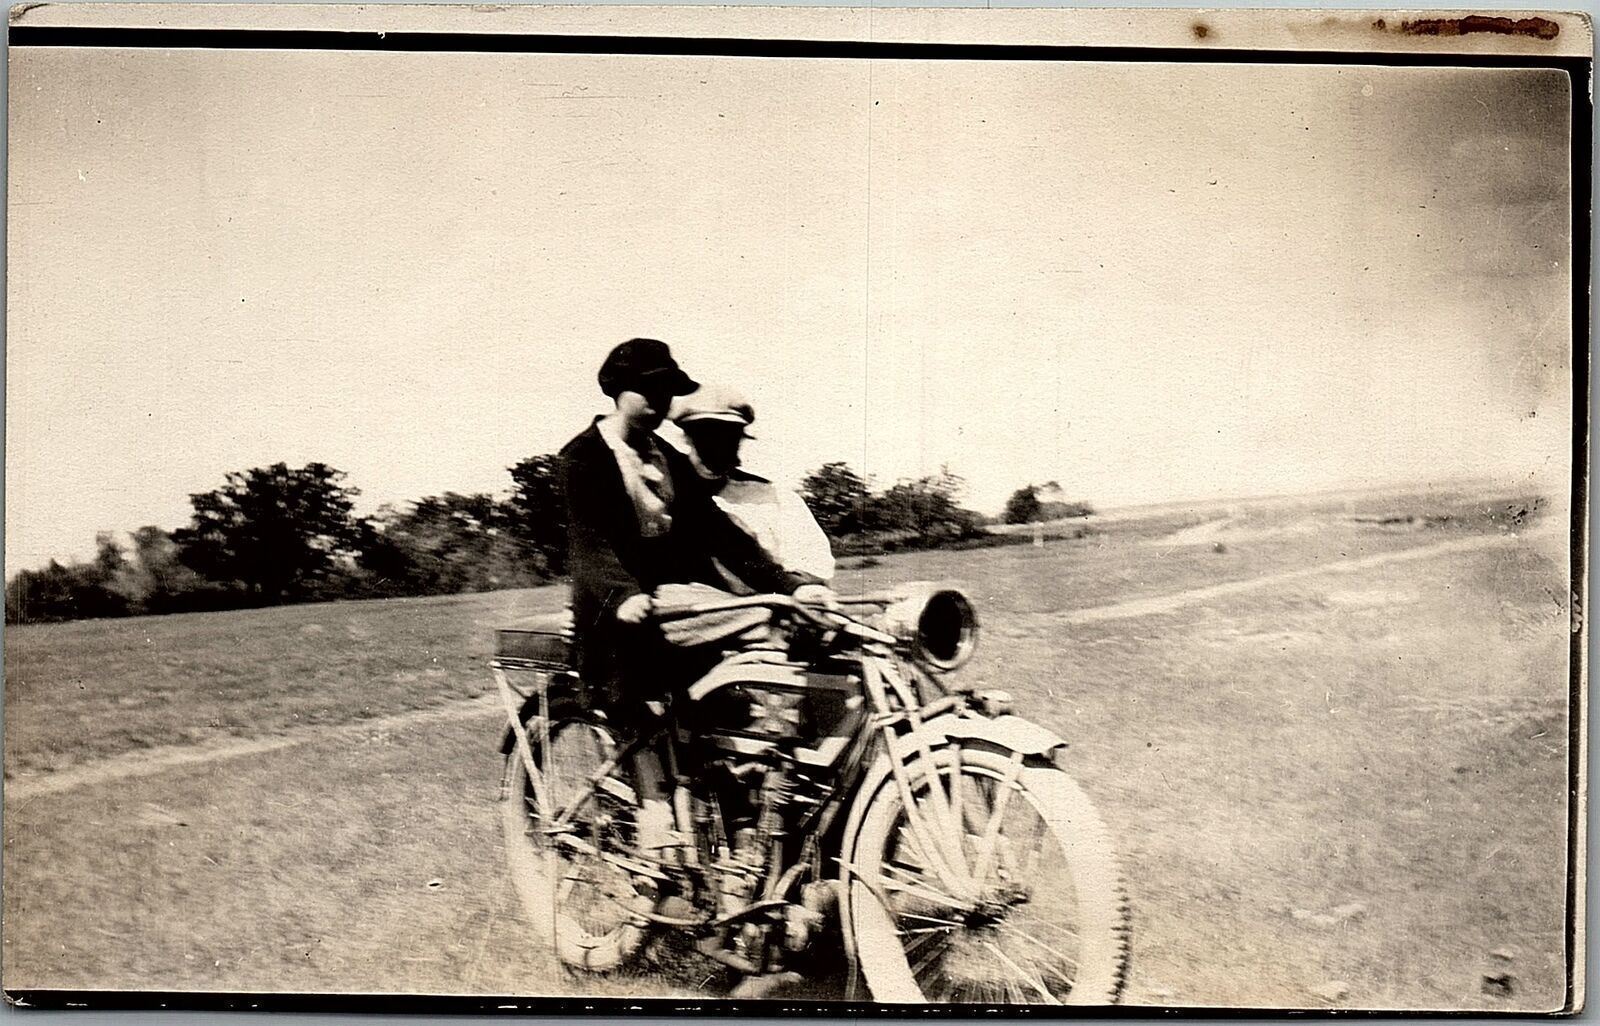 c1917 EXCELSIOR TWIN MOTORCYCLE LADY AND MAN PHOTO RARE RPPC POSTCARD 39-138